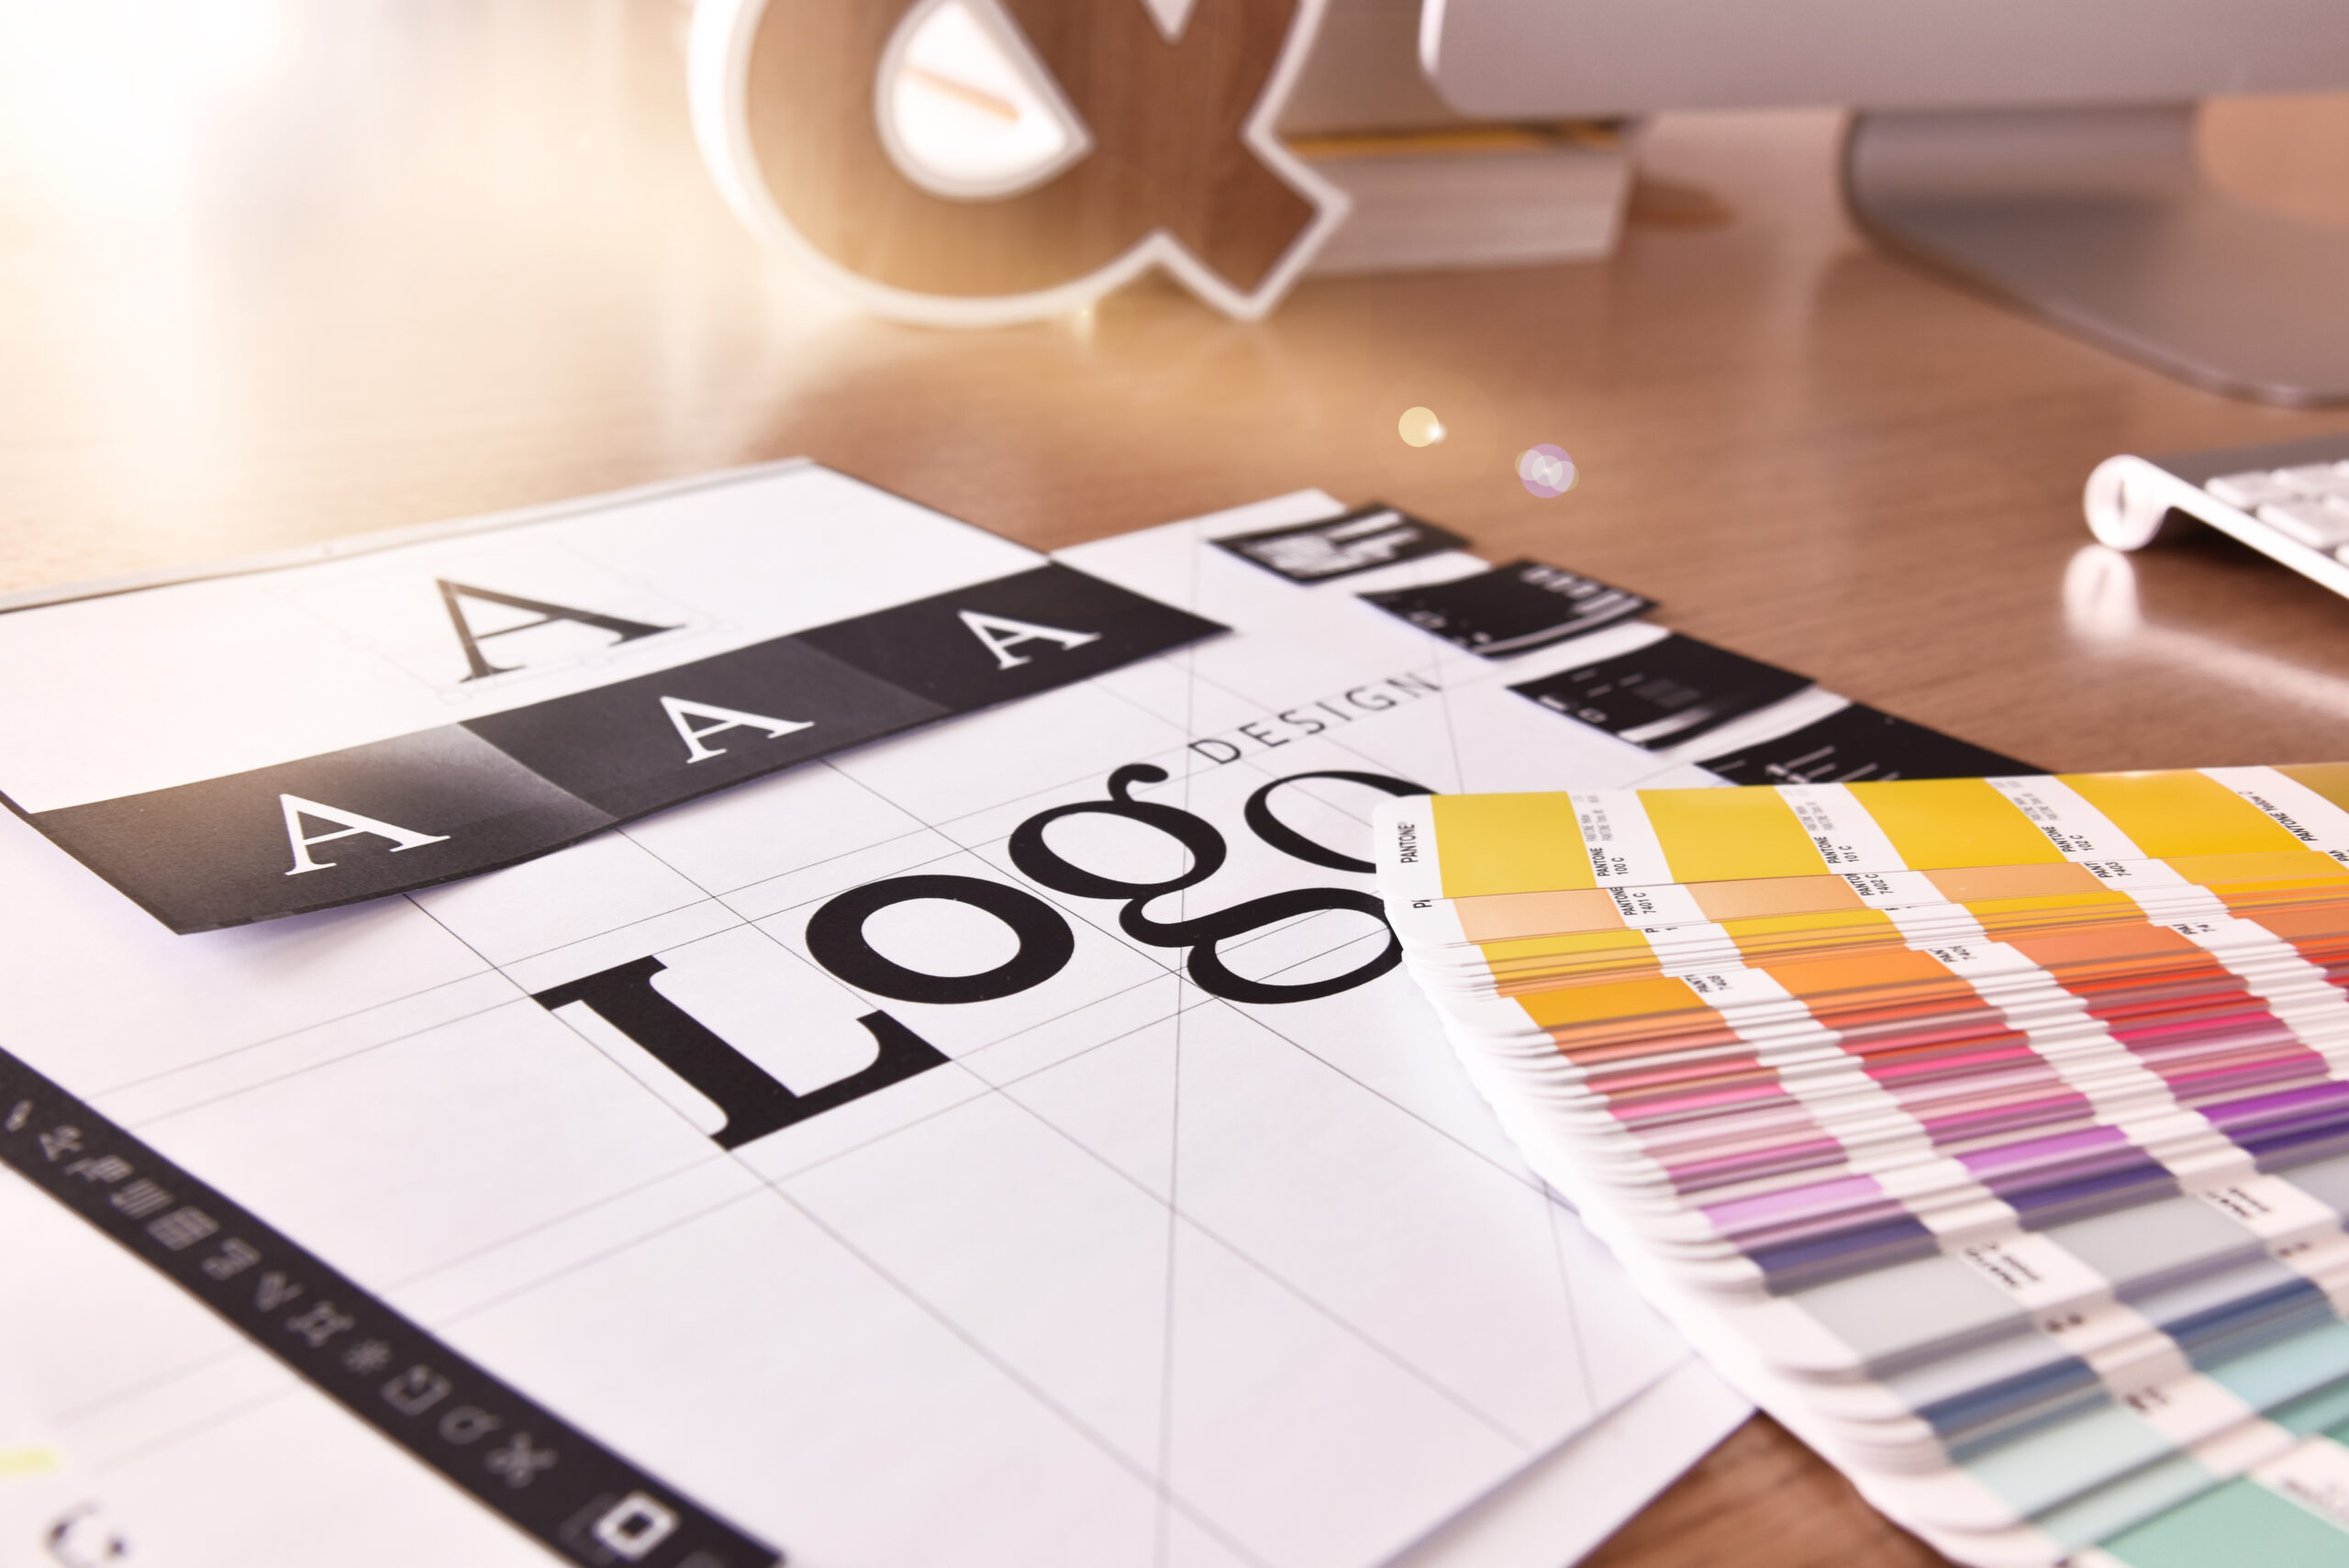 A desk with a logo and color swatches used for marketing purposes.